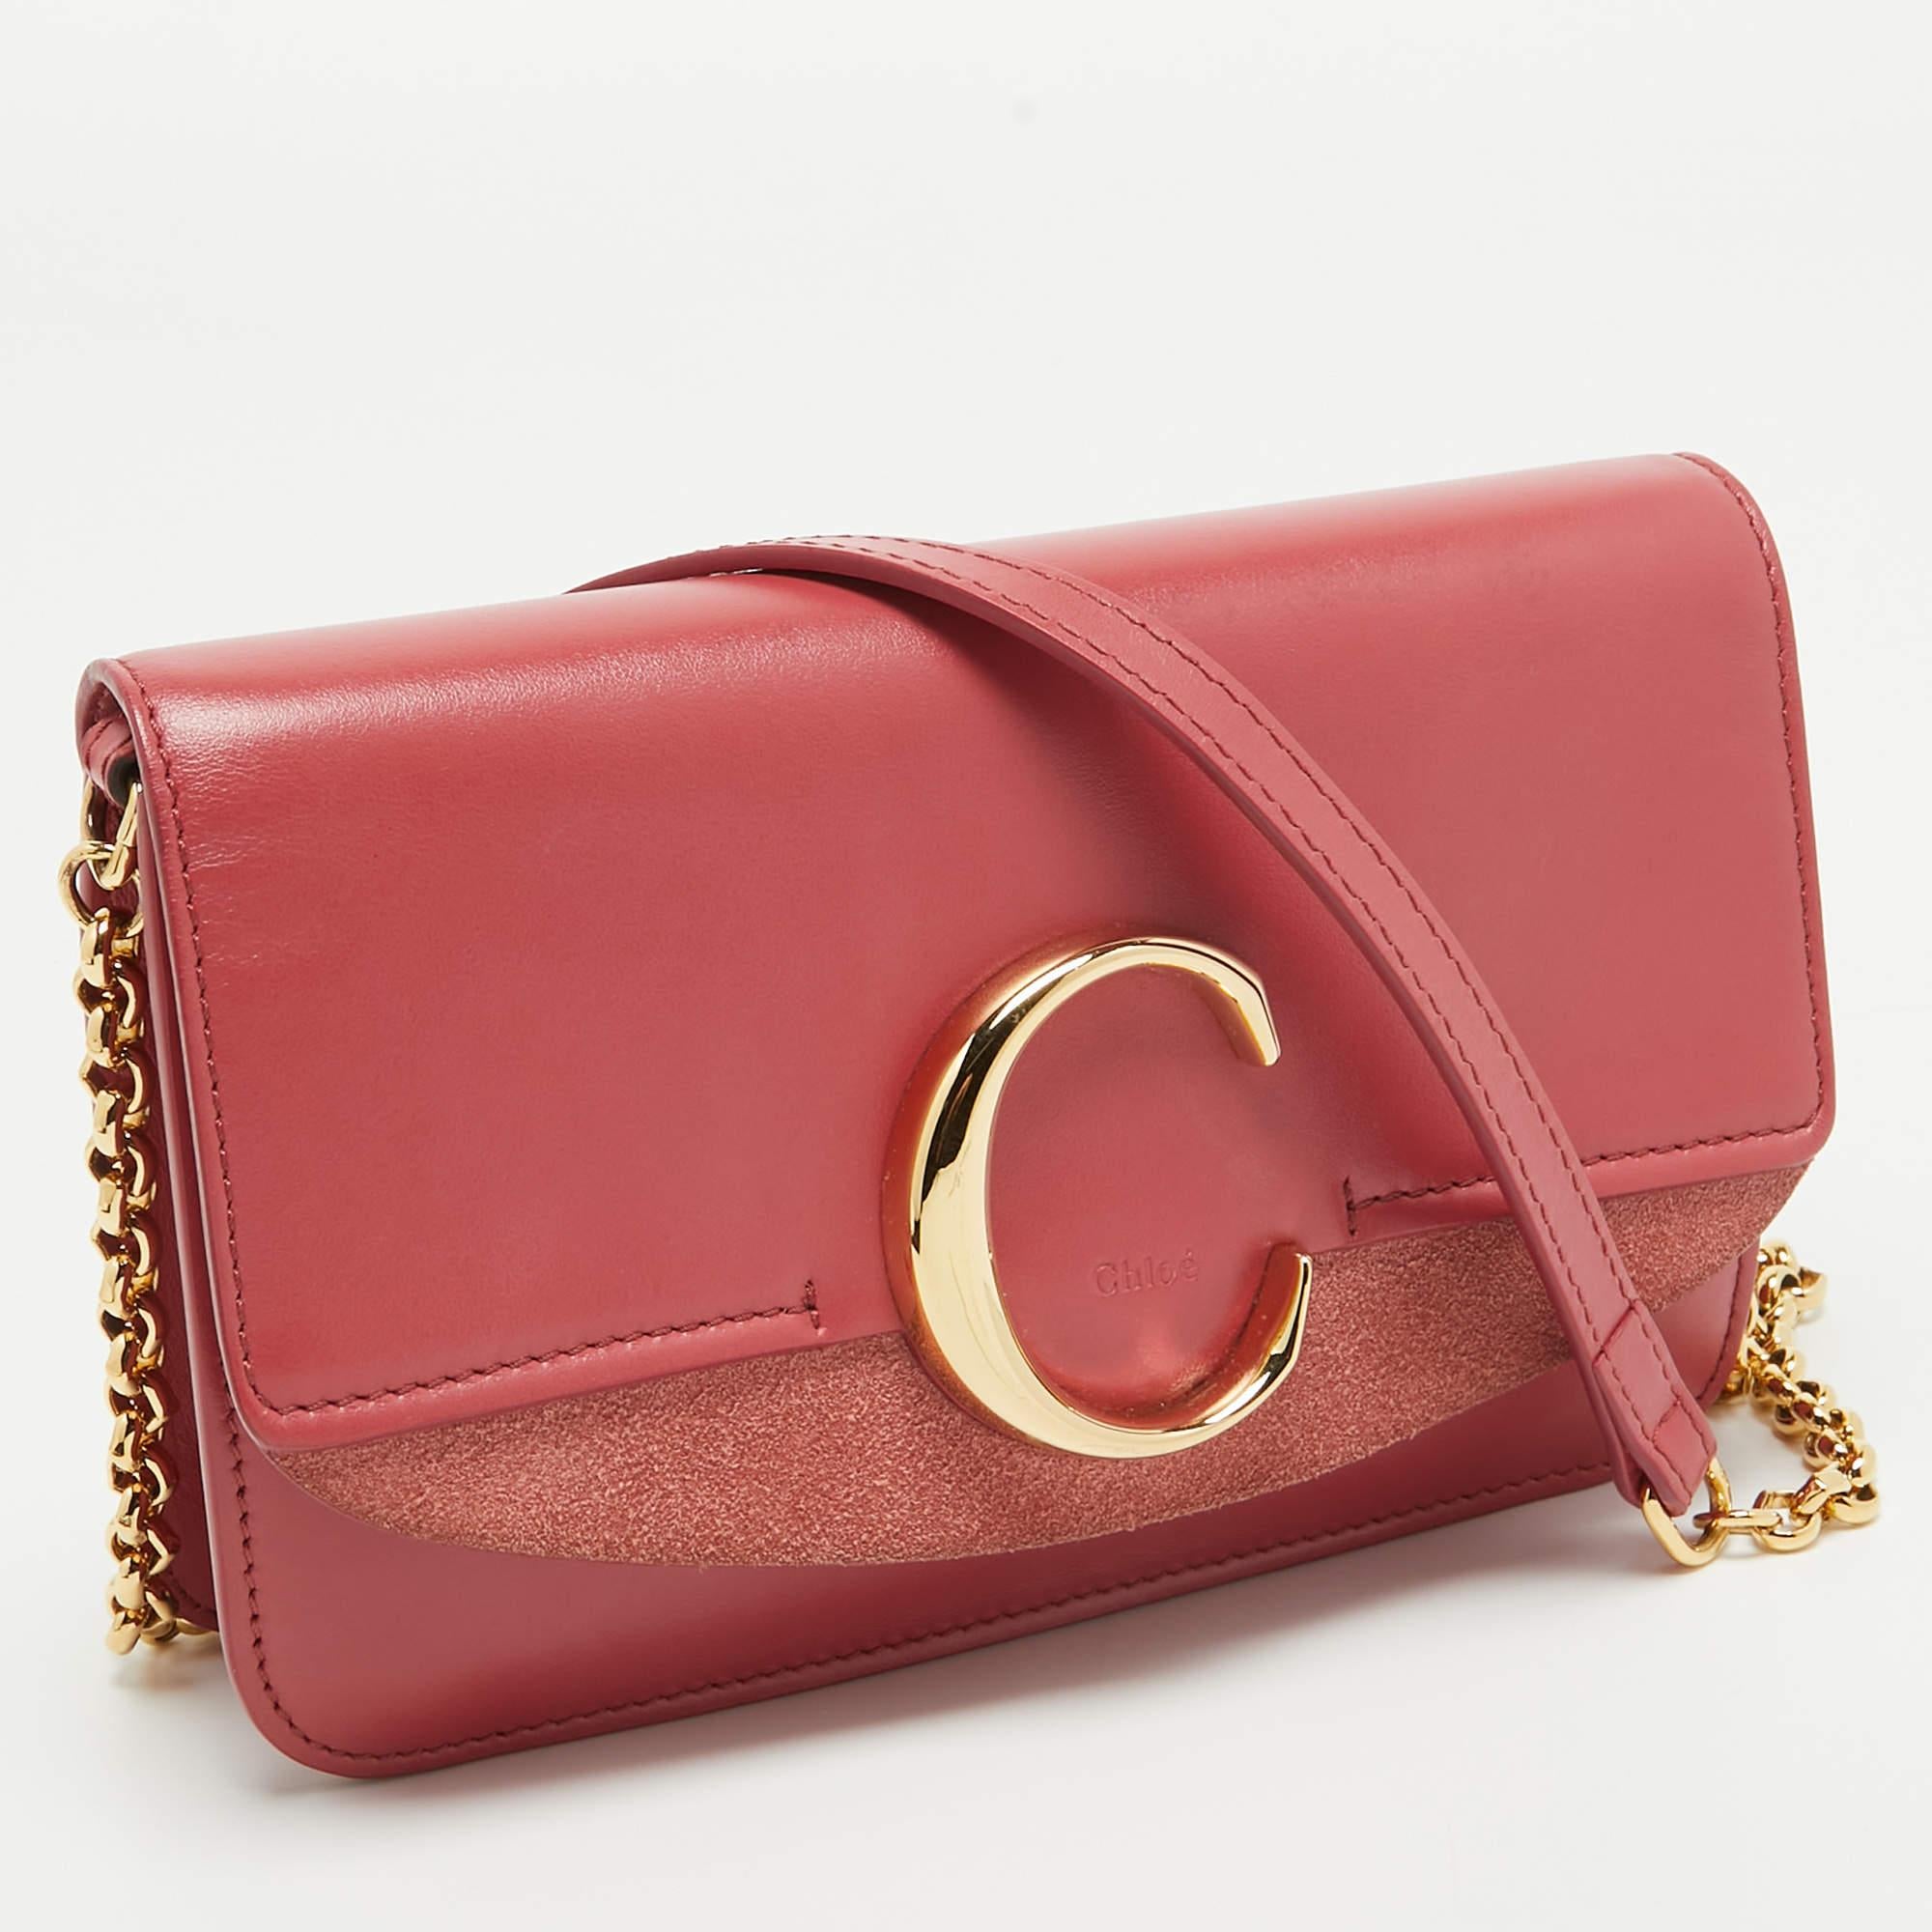 Chloe Pink Leather and Suede C Chain Clutch In Good Condition For Sale In Dubai, Al Qouz 2